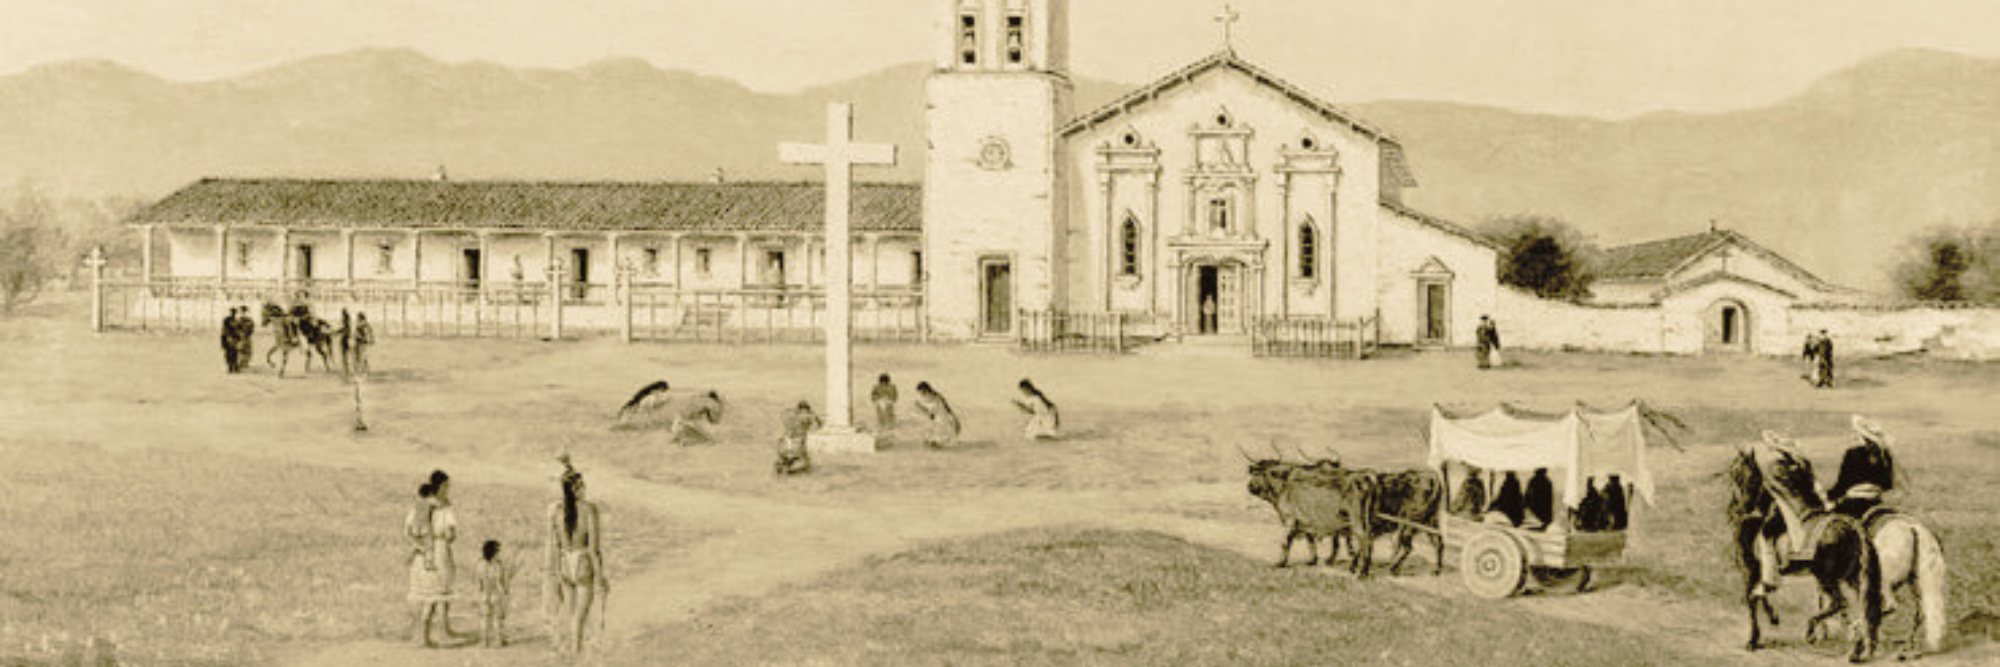 Mission with Ohlone people in foreground 